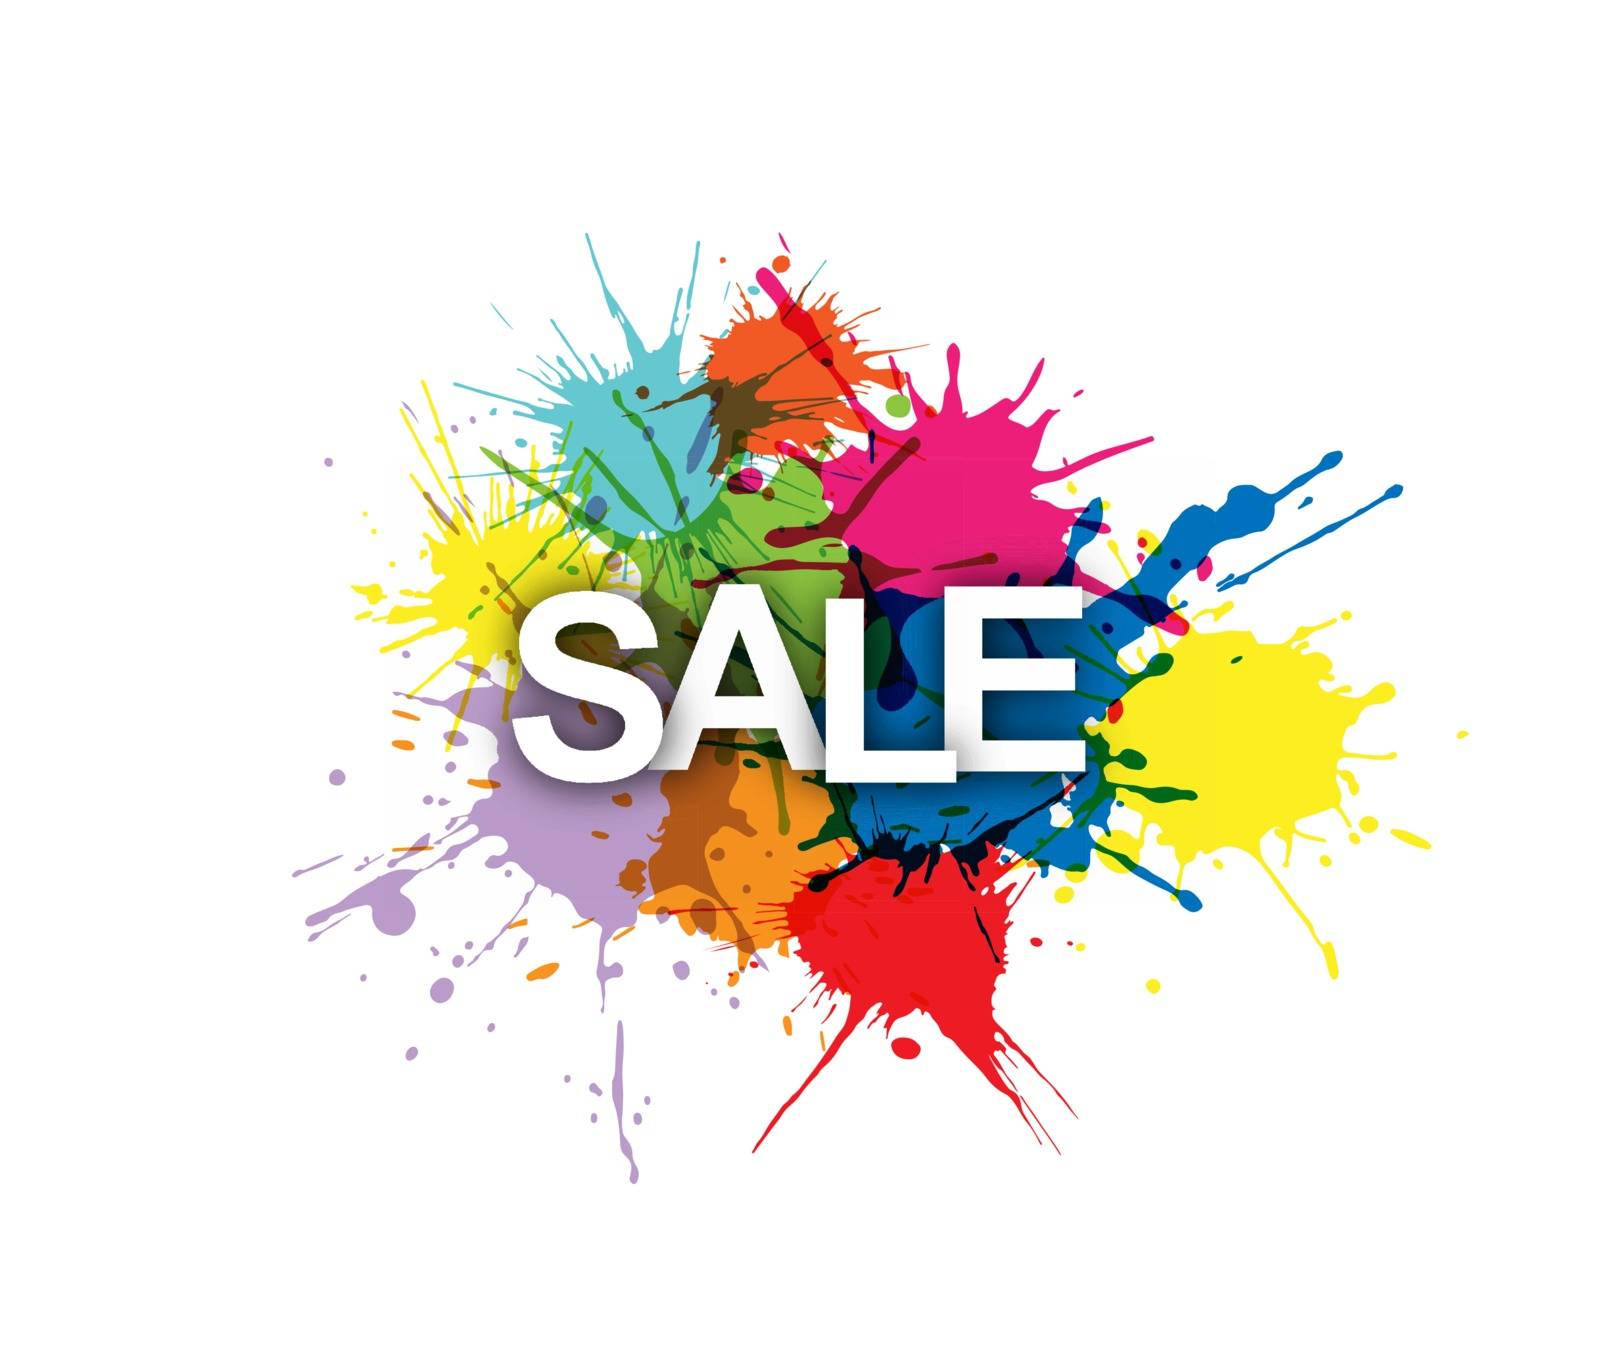 SALE! Colorful banner of colorful splashes of paint. by Grommik